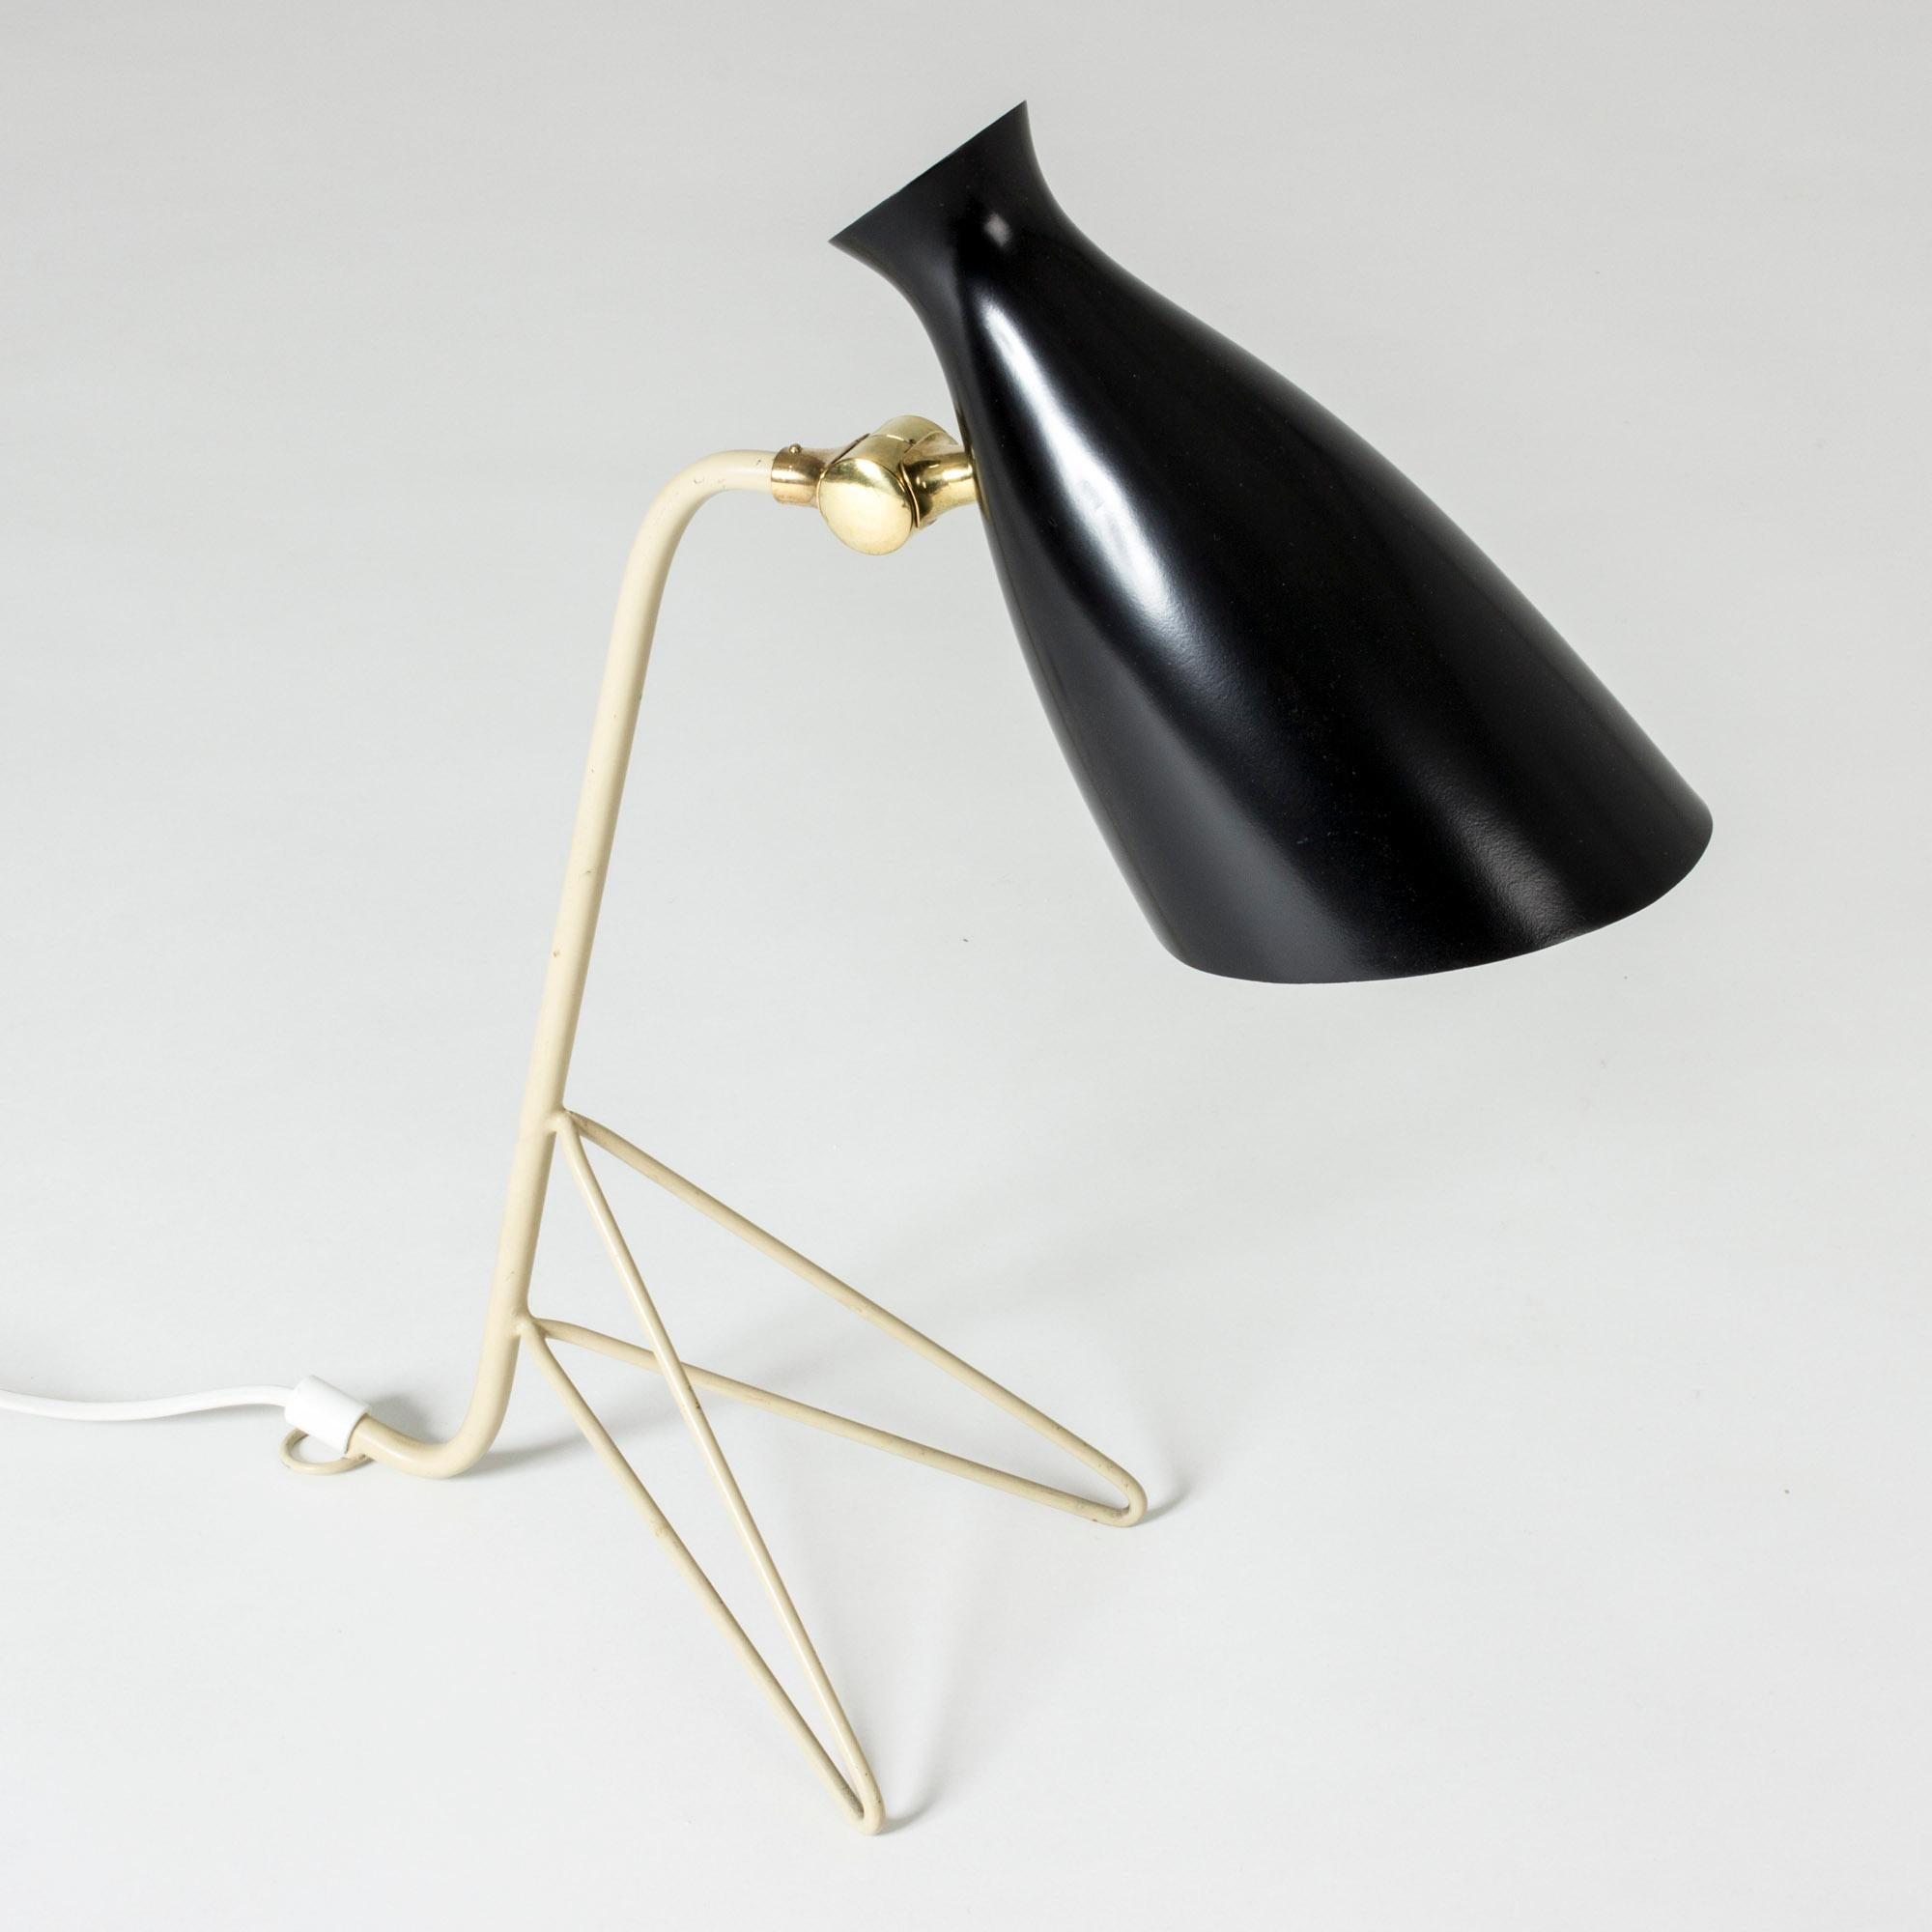 Cool Swedish 1950s table or desk lamp from Glas and Kristall Armatur. Metal lacquered black and eggshell, nice brass detail.